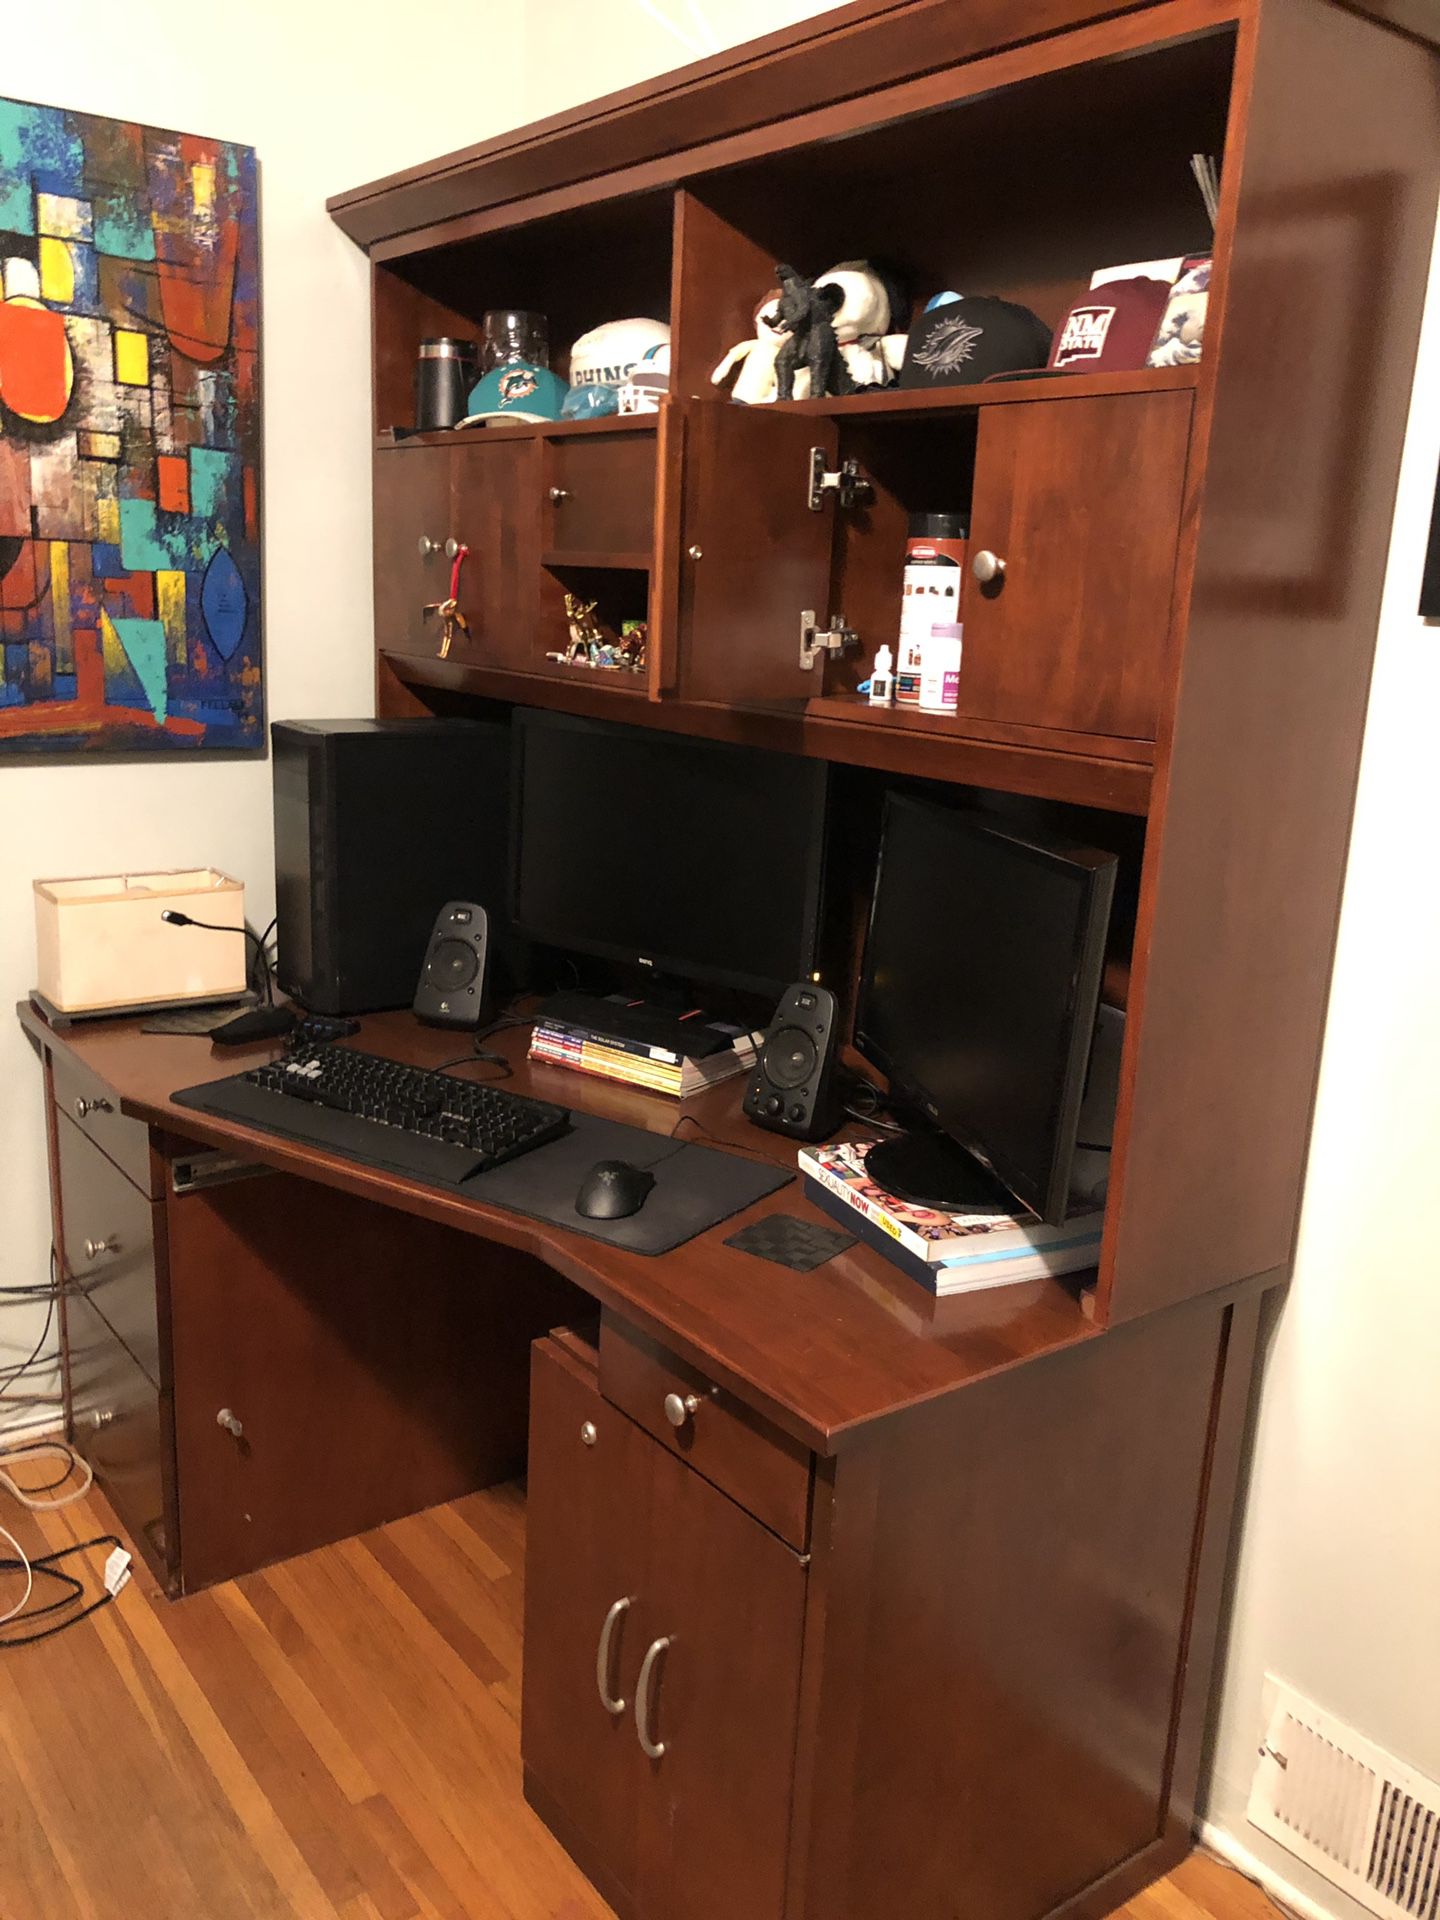 2 pc desk set made of solid wood construction throughout, lots of file drawers and cabinet space w pullout sliding desk . Also included built-in ligh